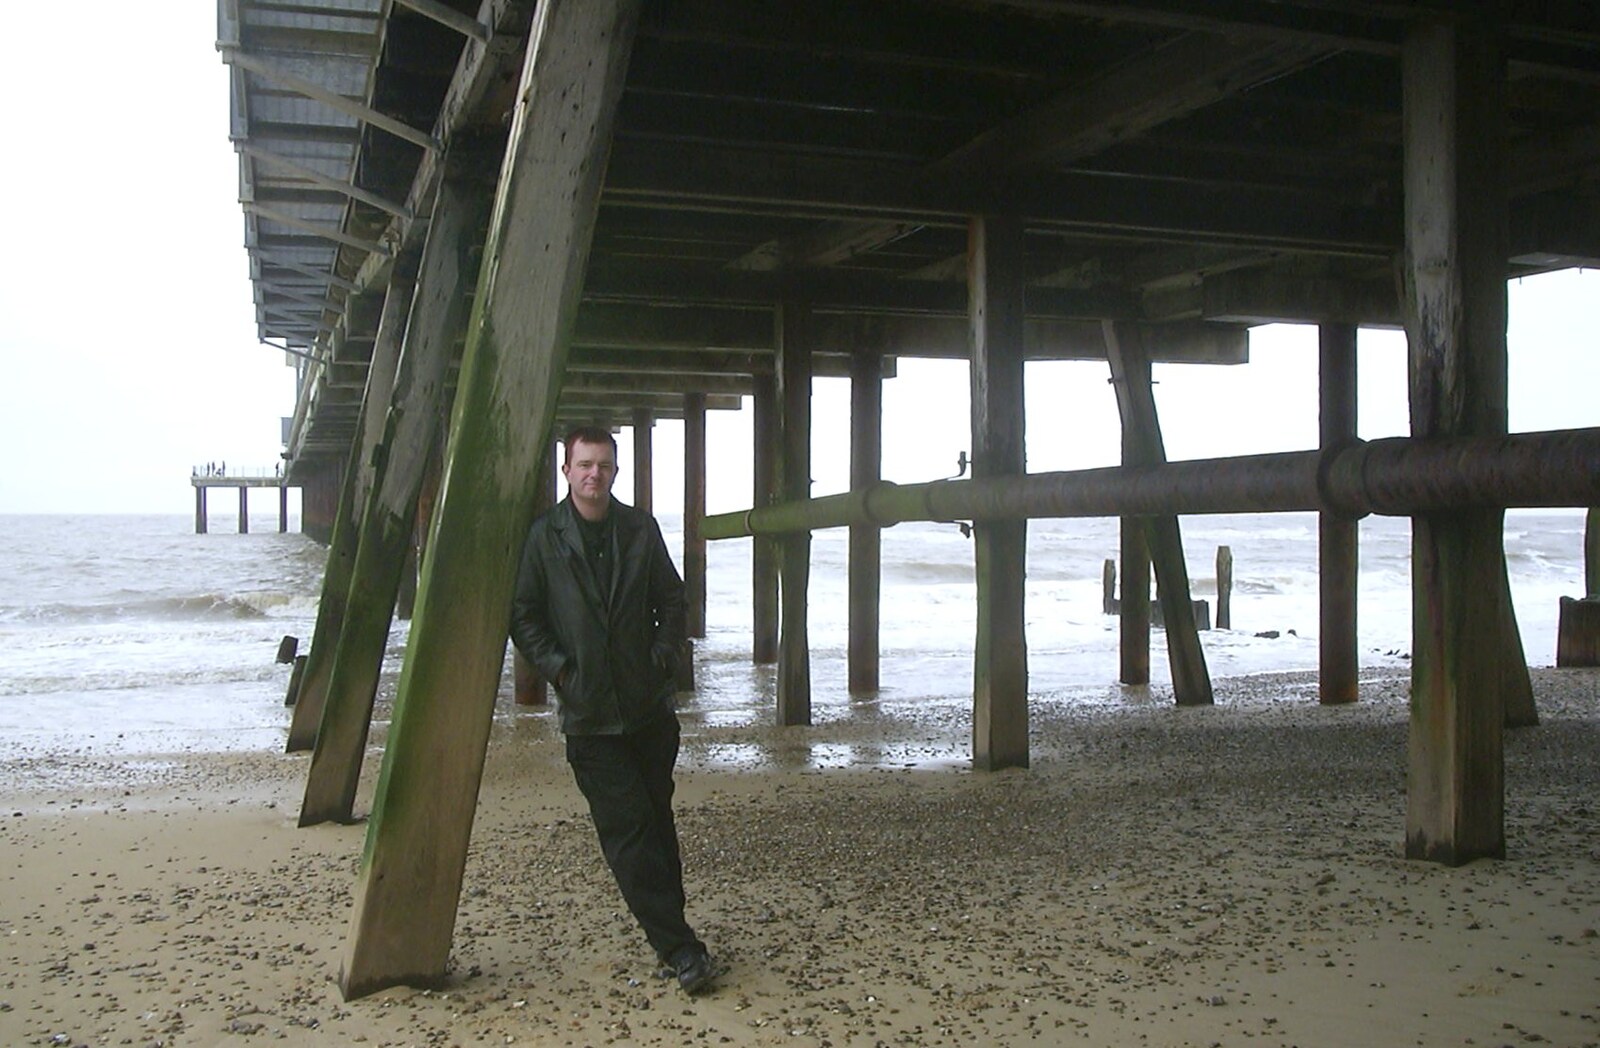 Nosher leans against the pier supports from Moping in Southwold, Suffolk - 3rd April 2004